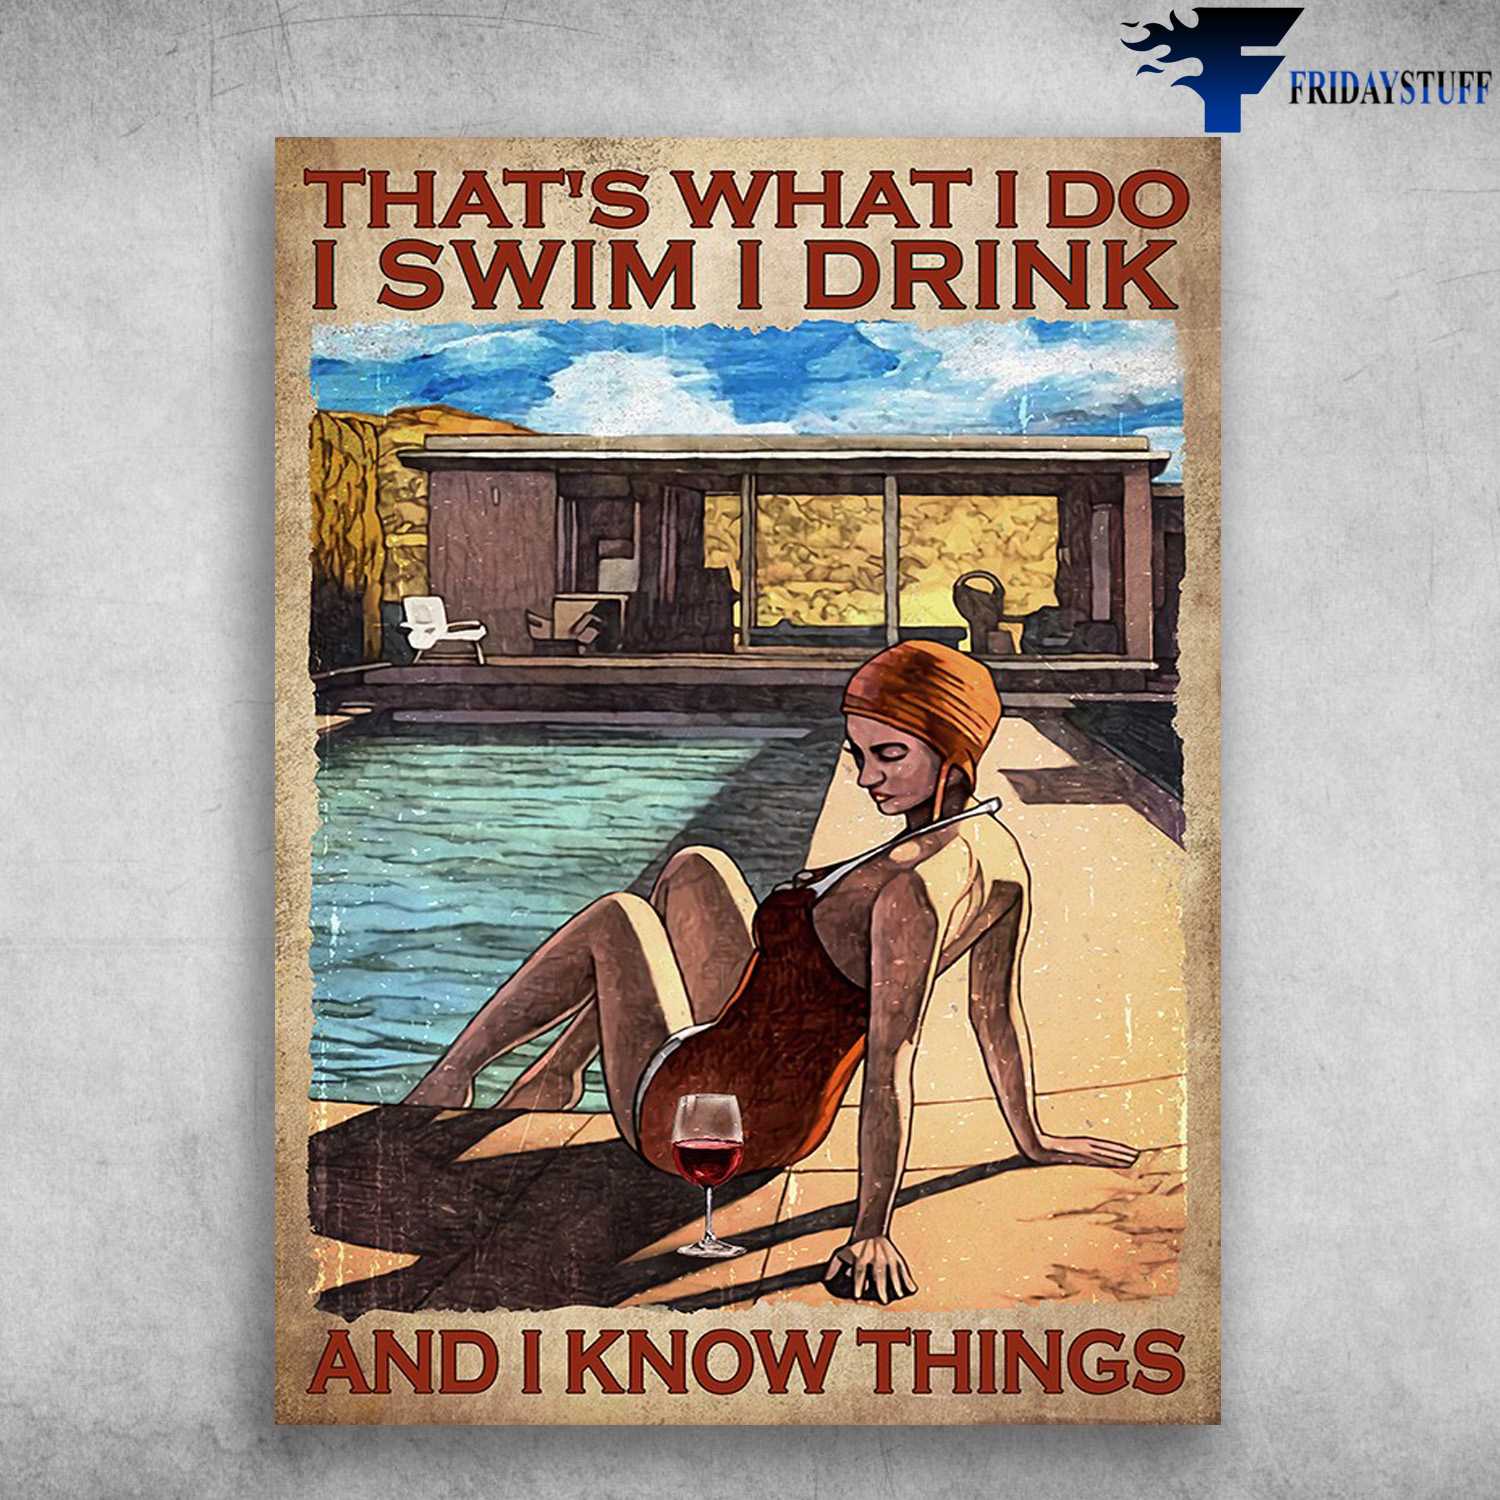 Swimming Girl, Drinkk Wine - That's What I Do, I Swim, I Drink, And I Know Things